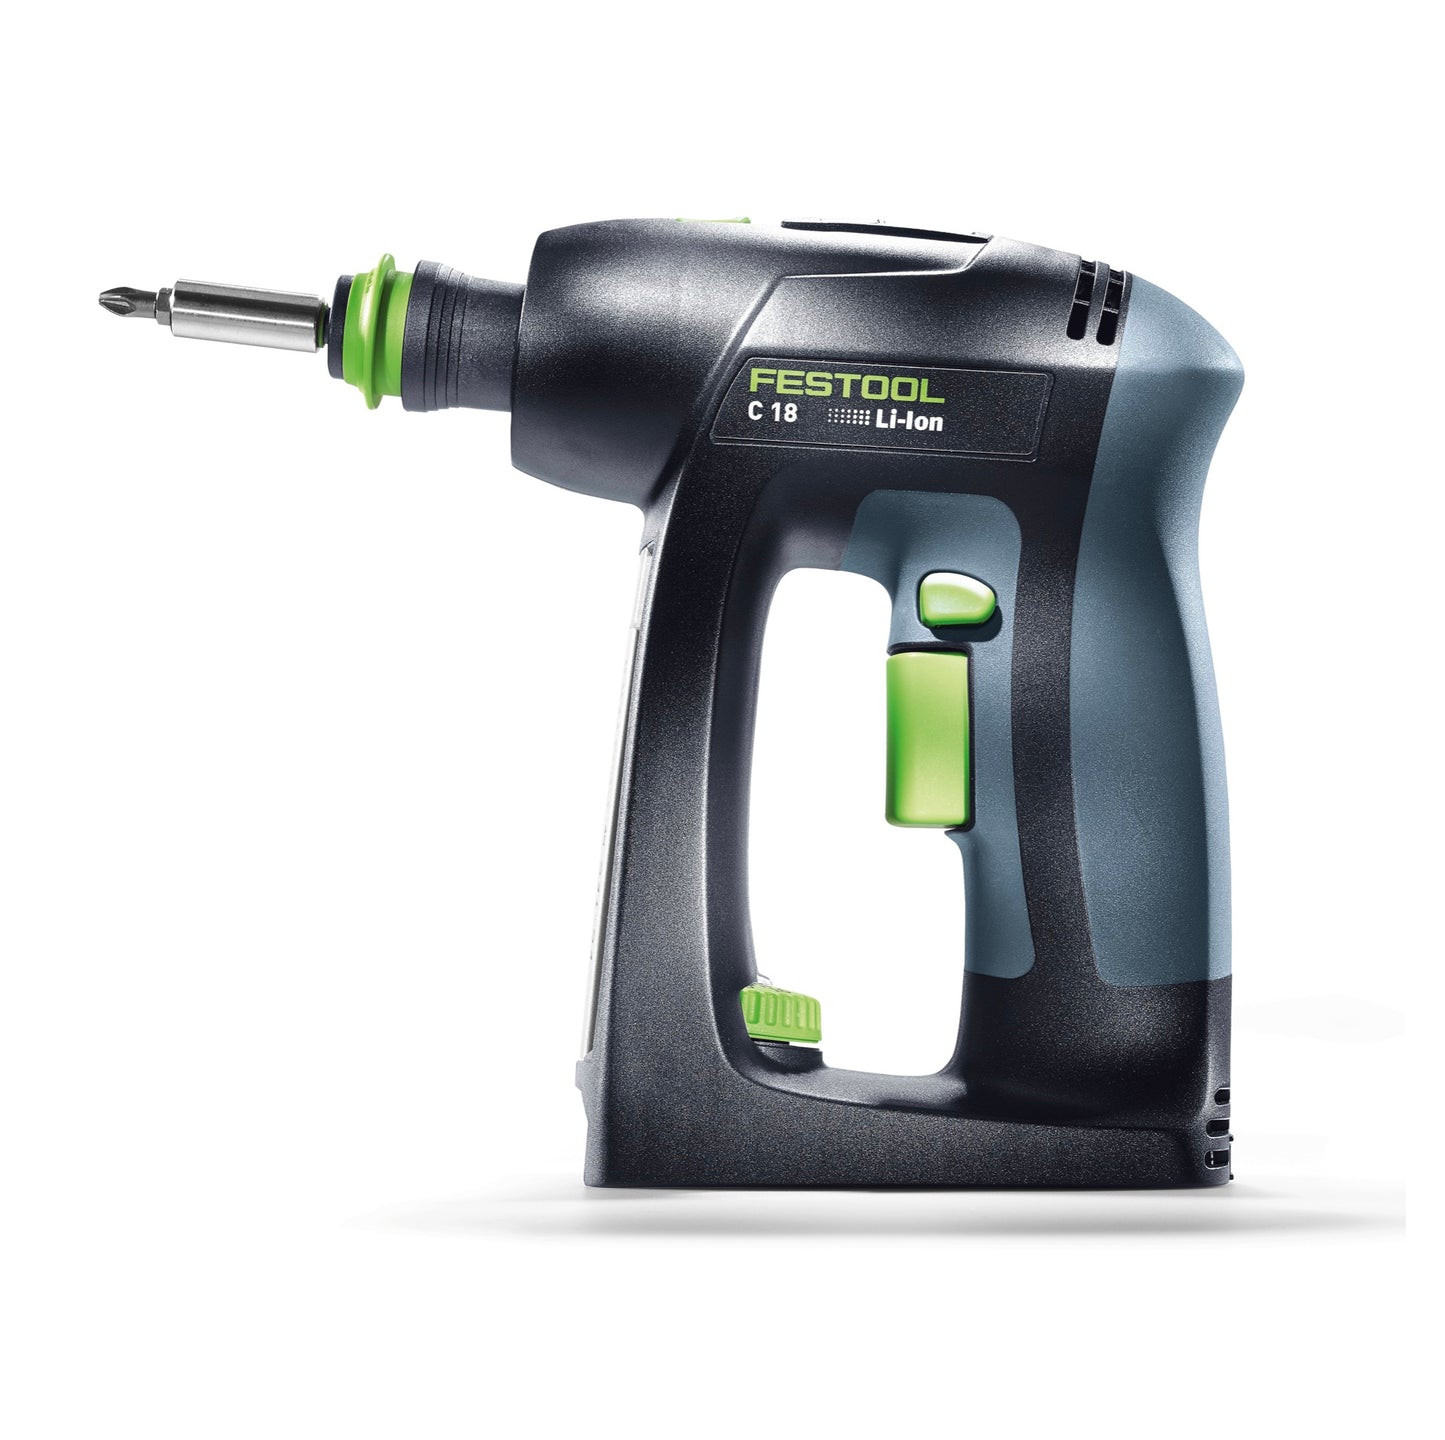 Festool C 18 Basic Akku Bohrschrauber 18 V 45 Nm Brushless Solo + Systainer + Systainer ToolBox SYS3 TB M 137